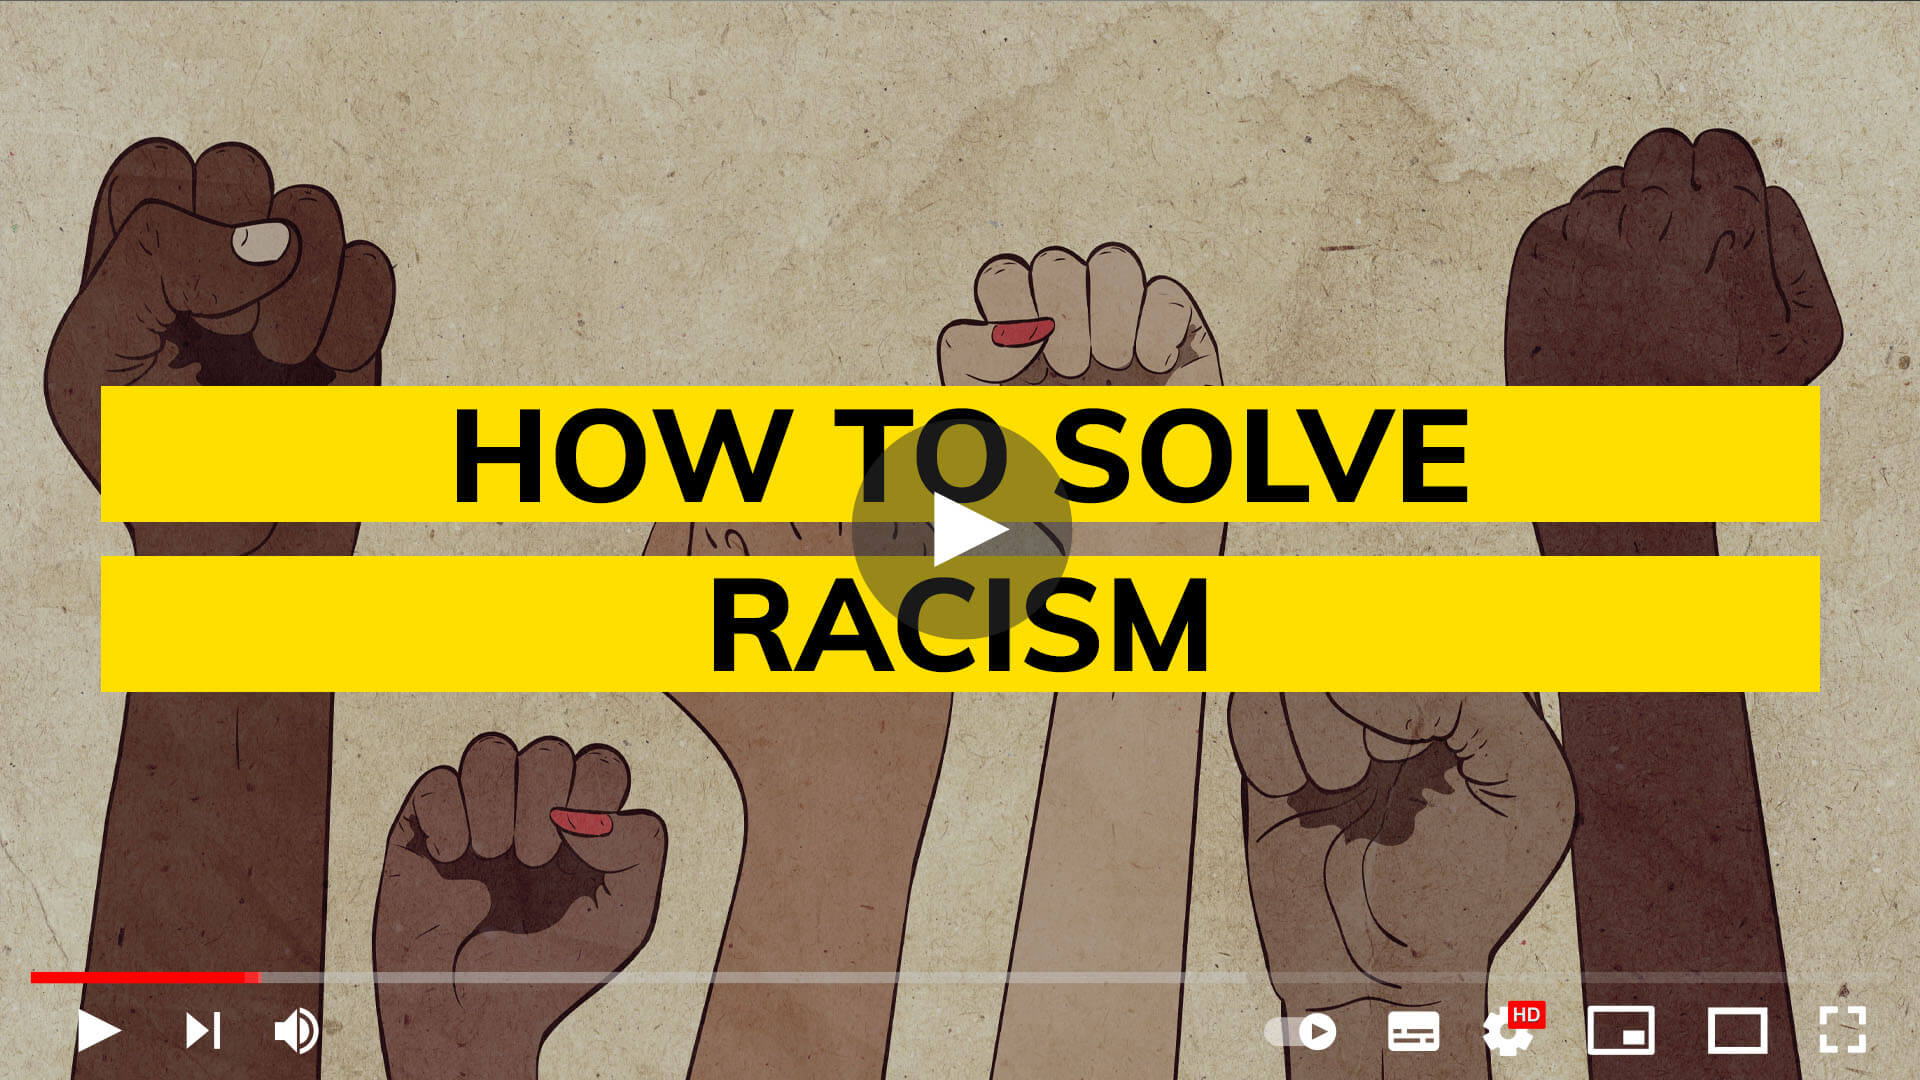 How to solve racism